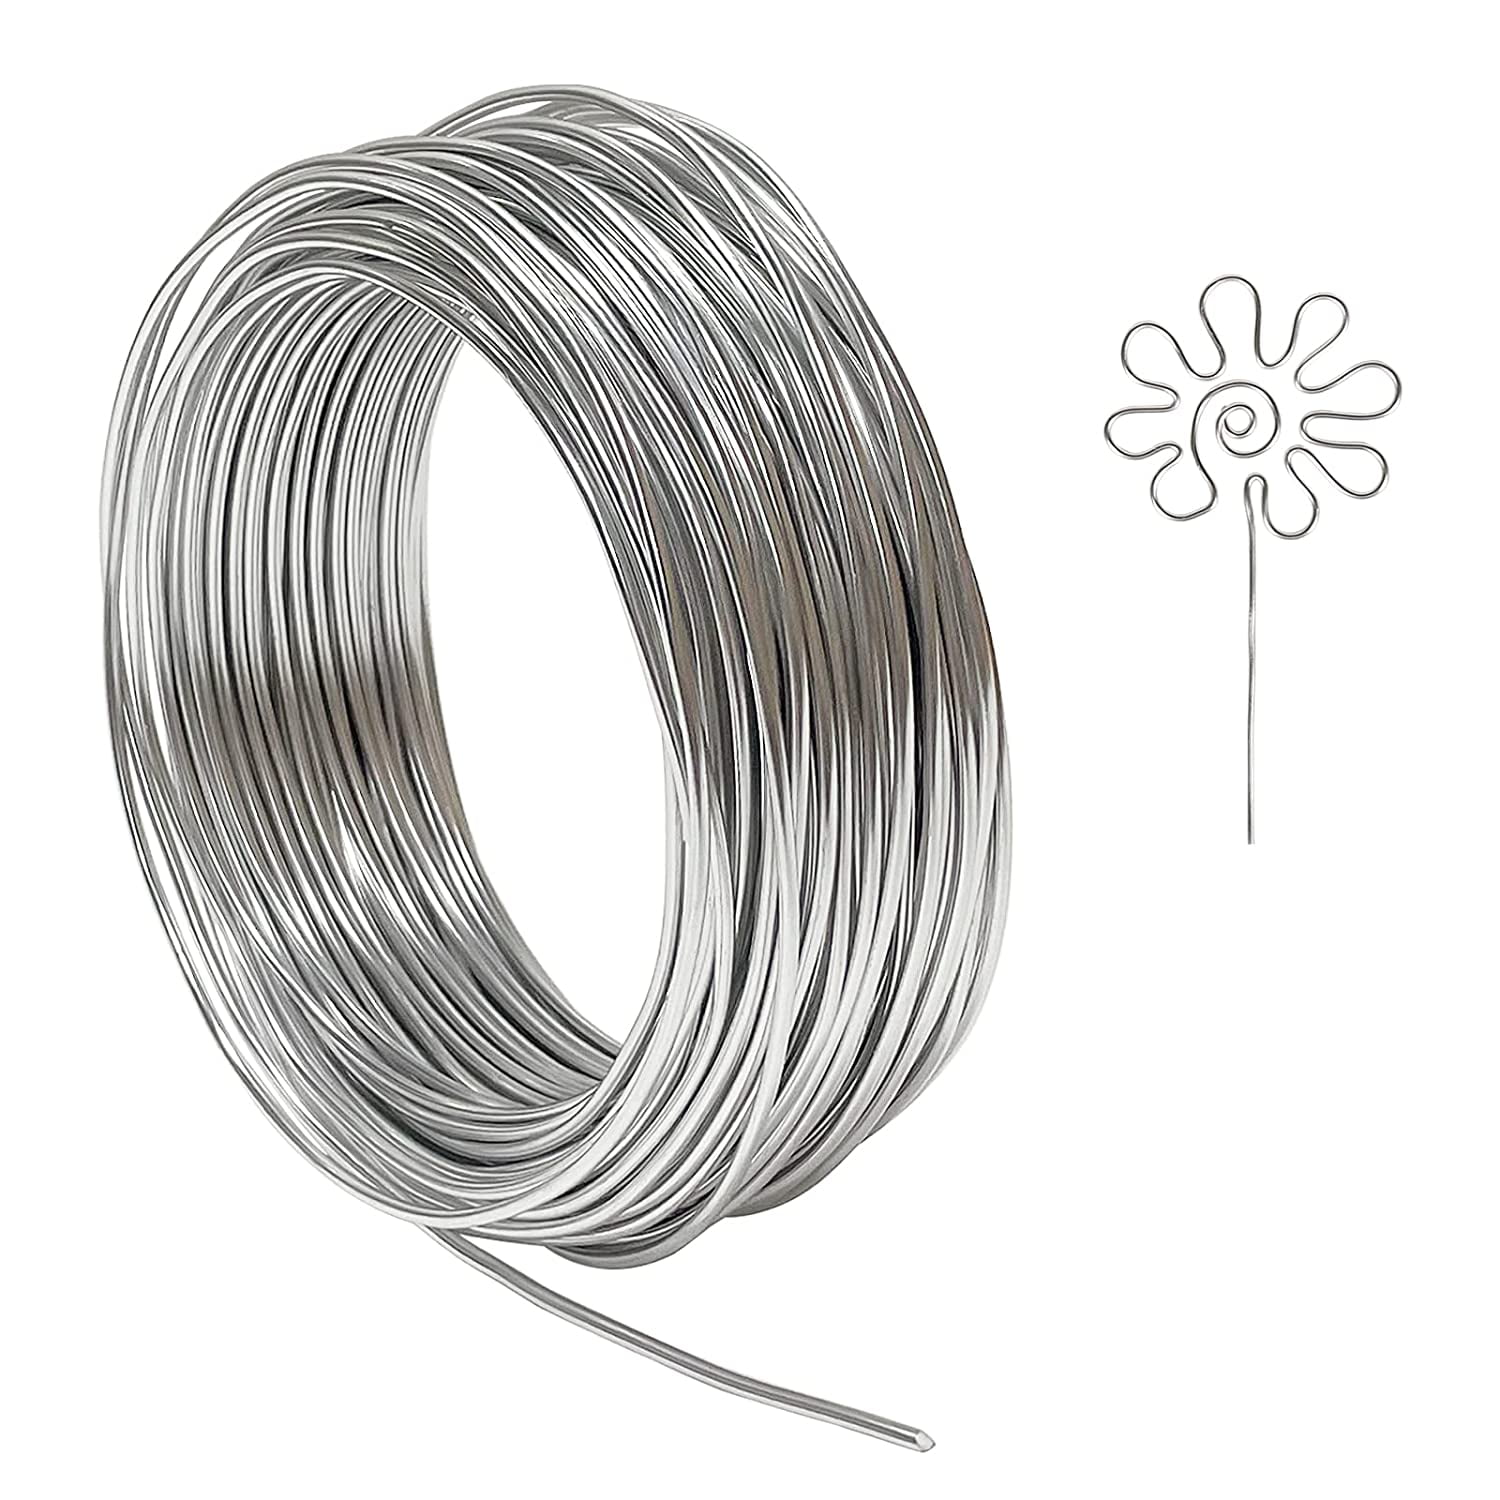 VILLCASE Wire Weaving 8 Rolls Metal Wire for Crafts Bendable Wire for  Crafts Gem Metal Thin Wire for Crafts Colored Chinlon Thread for Jewelry  Making